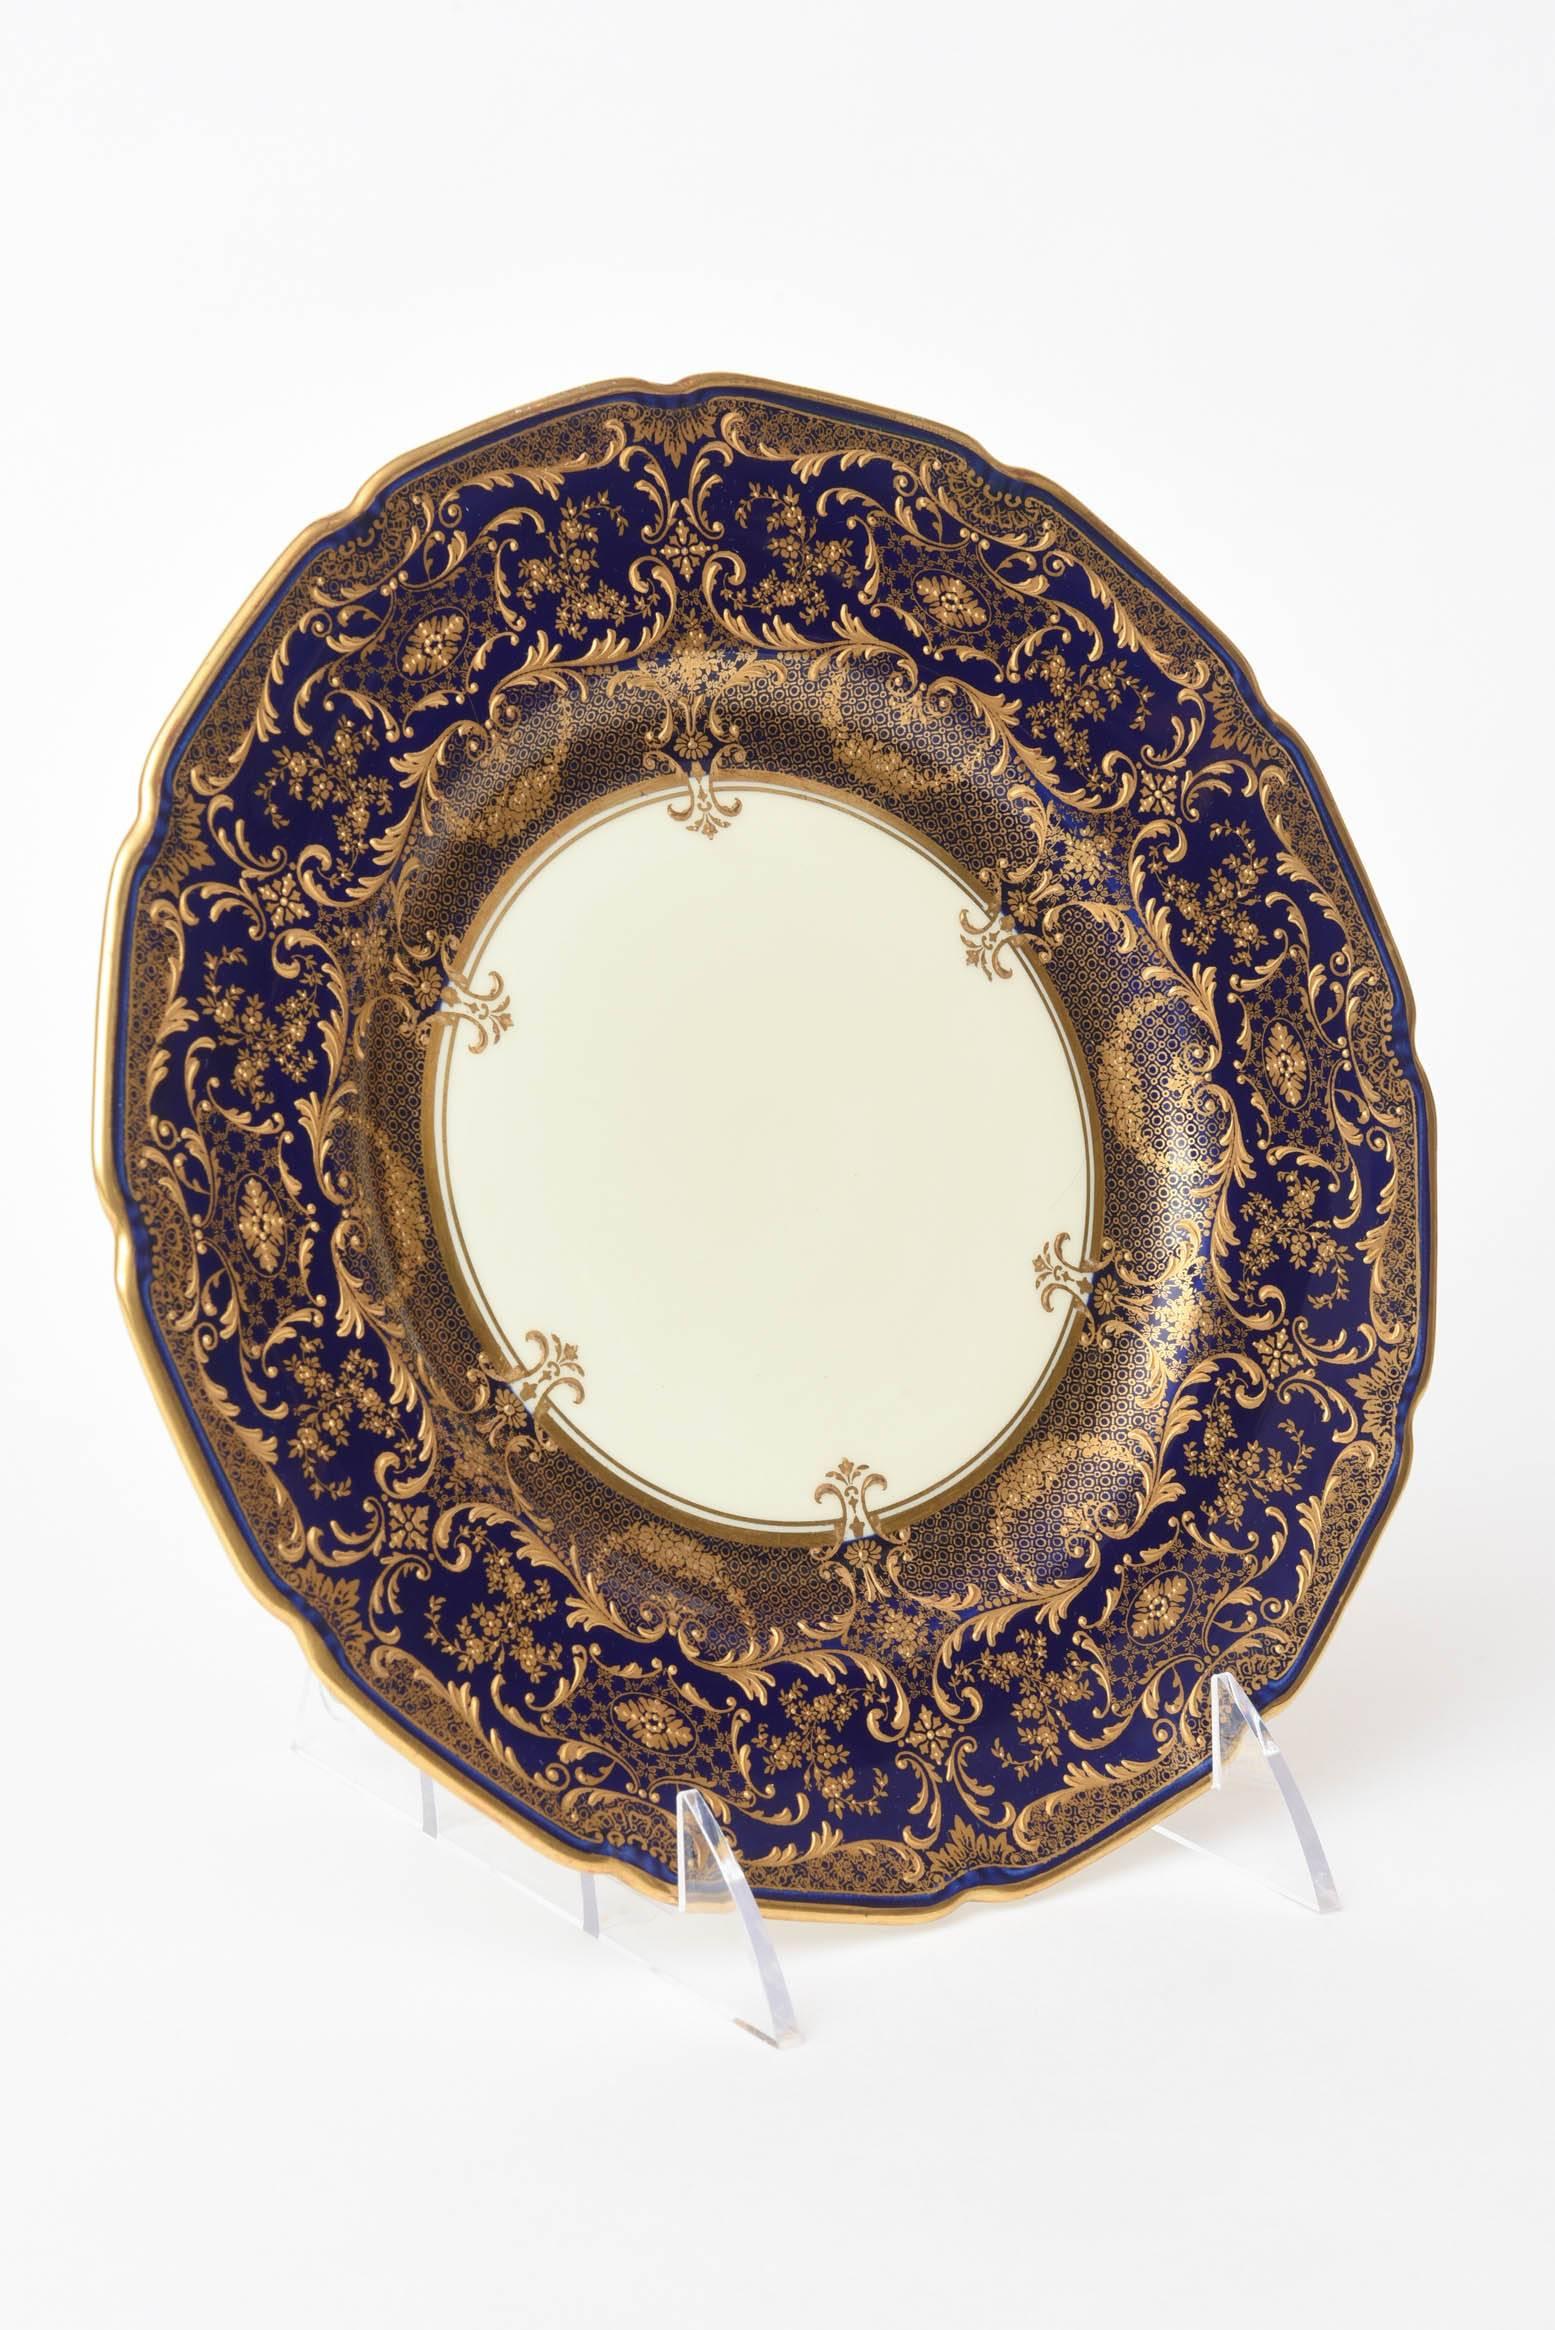 An impressive and highly decorated set of antique plates featuring lots of raised tooled gilding on a Classic Robert Allen shaped plate with crisp vibrant cobalt blue shoulders. Custom ordered through the fine retailers of Ovington Brothers New York